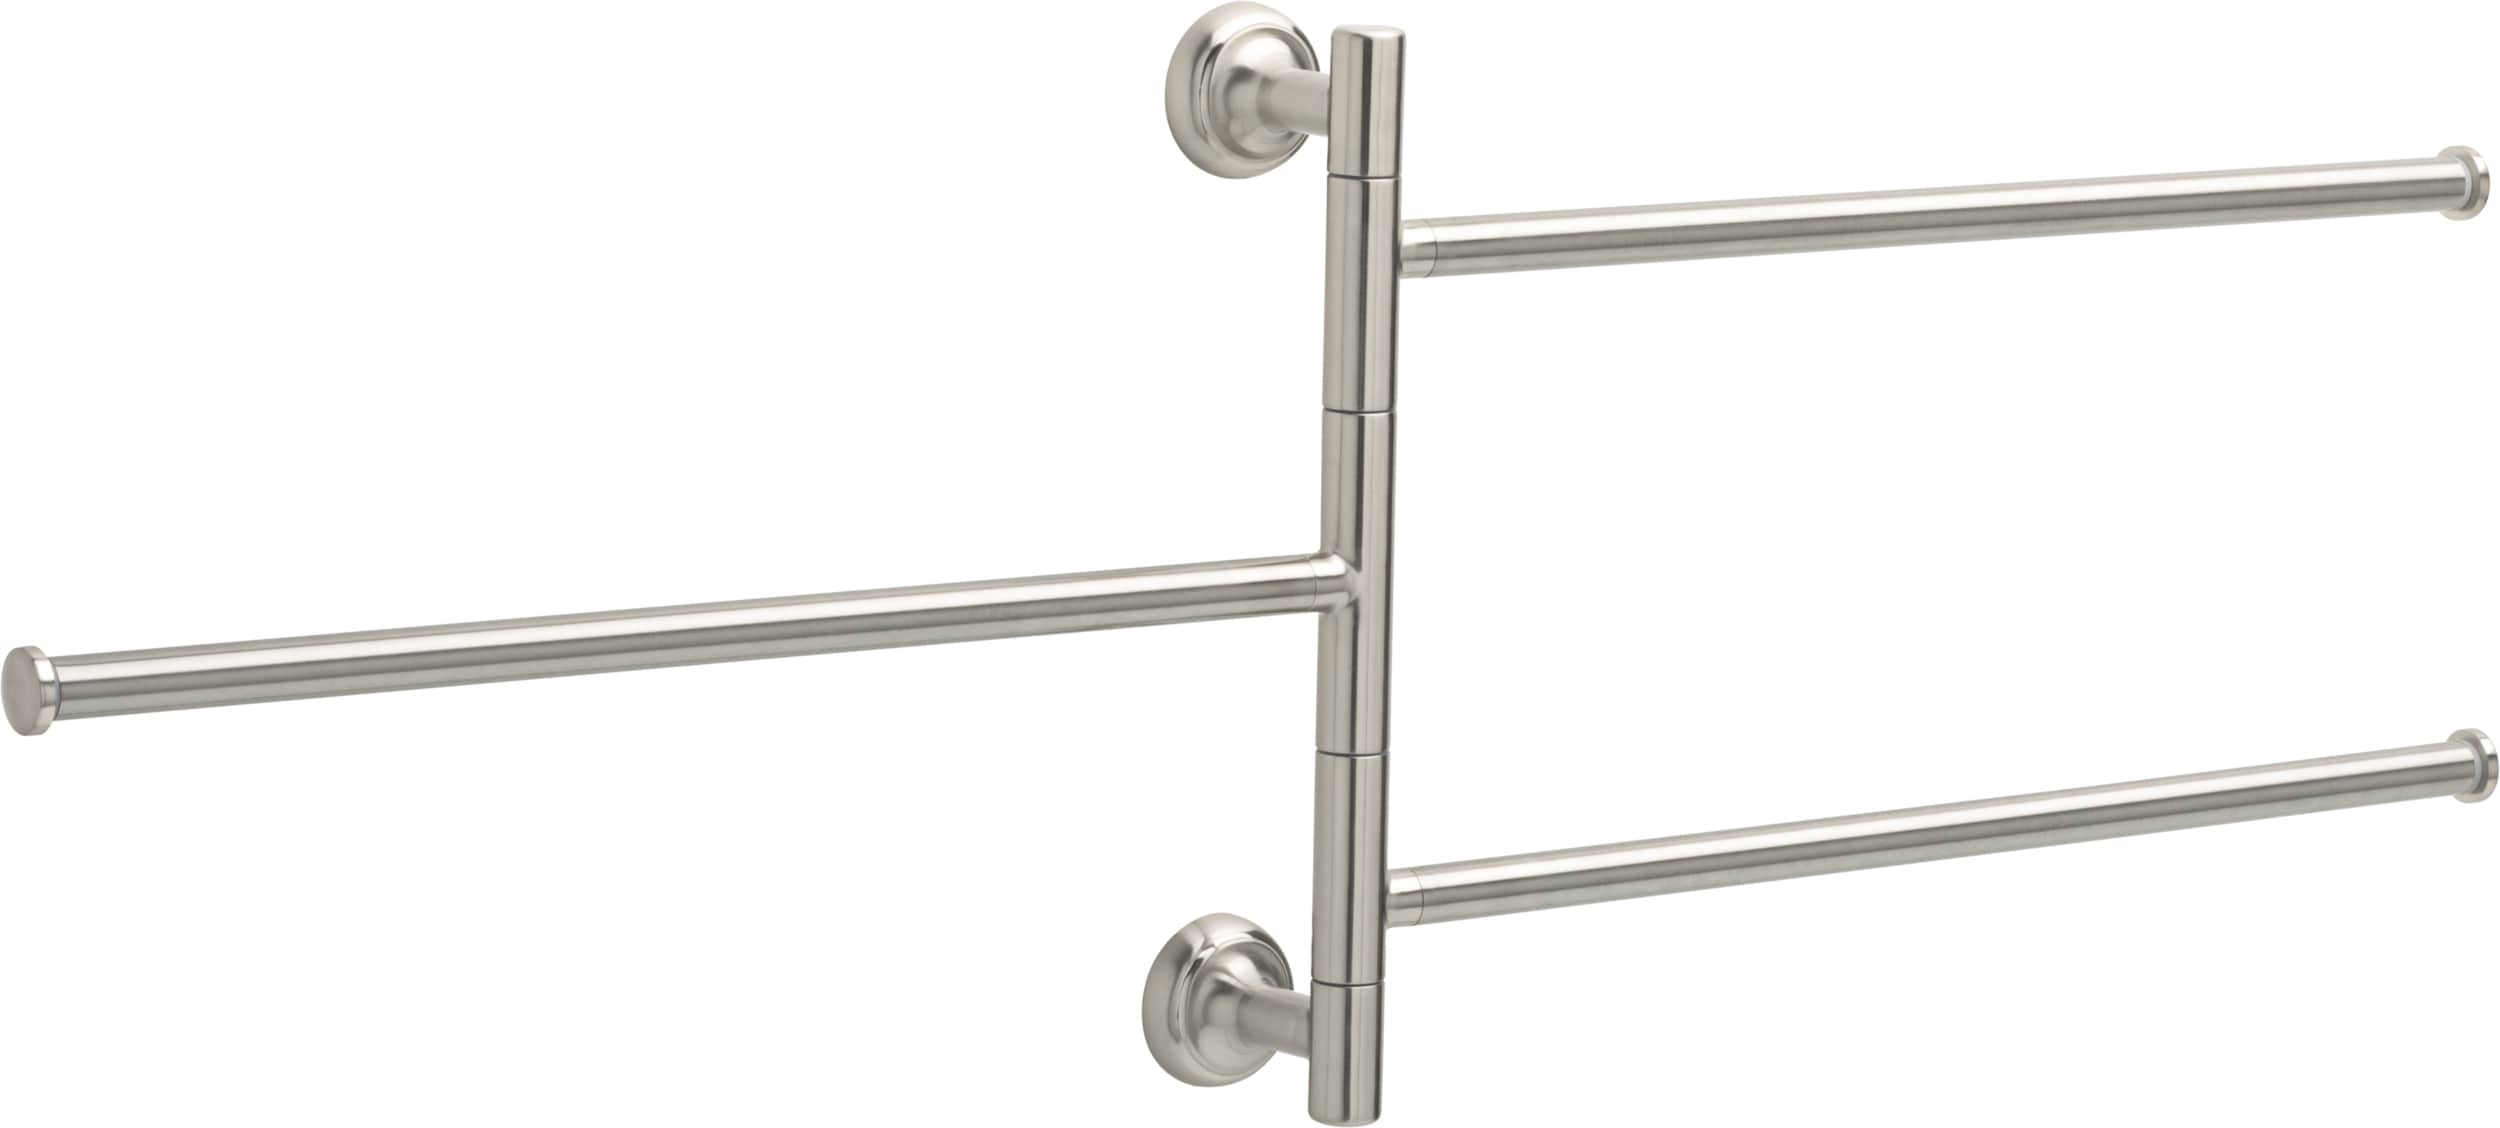 Delta Hospitality Extensions 5-Tier Wall Mount Towel Rack Bath Hardware  Accessory in Brushed Nickel HEXTN01-BN - The Home Depot